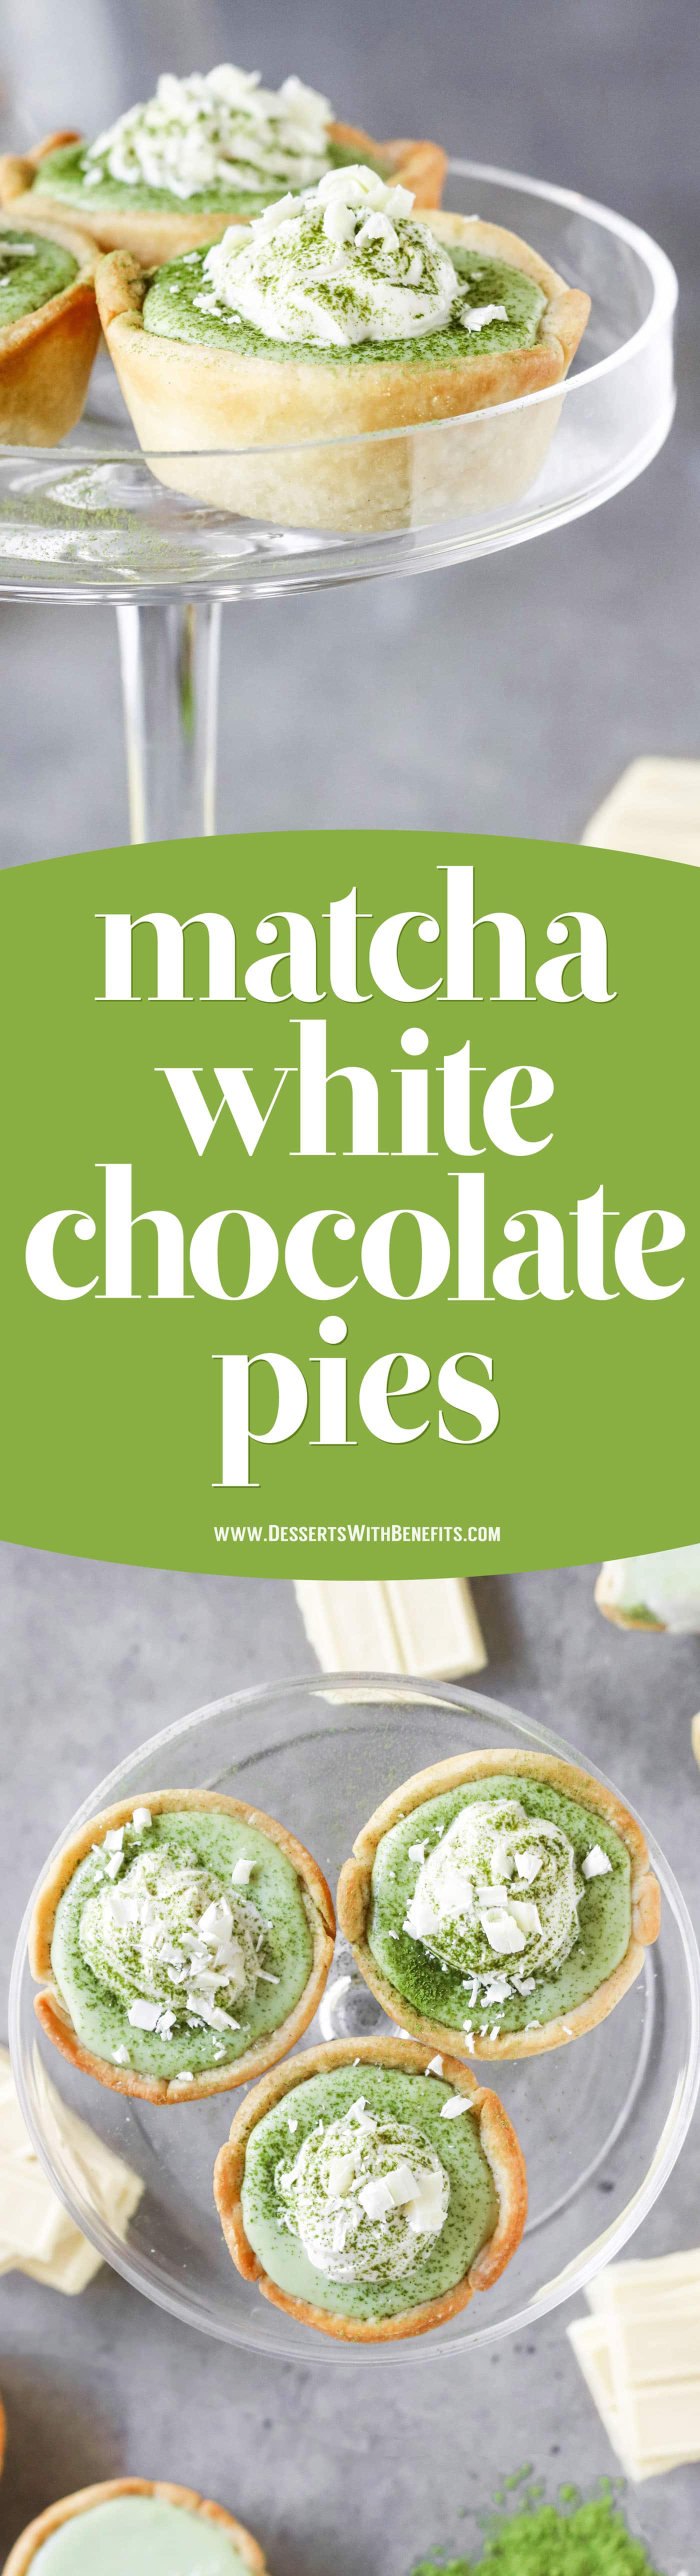 These Mini Matcha Green Tea White Chocolate Pies have a light and flaky pie crust filled with a creamy, sweet, delicious matcha-white chocolate filling.